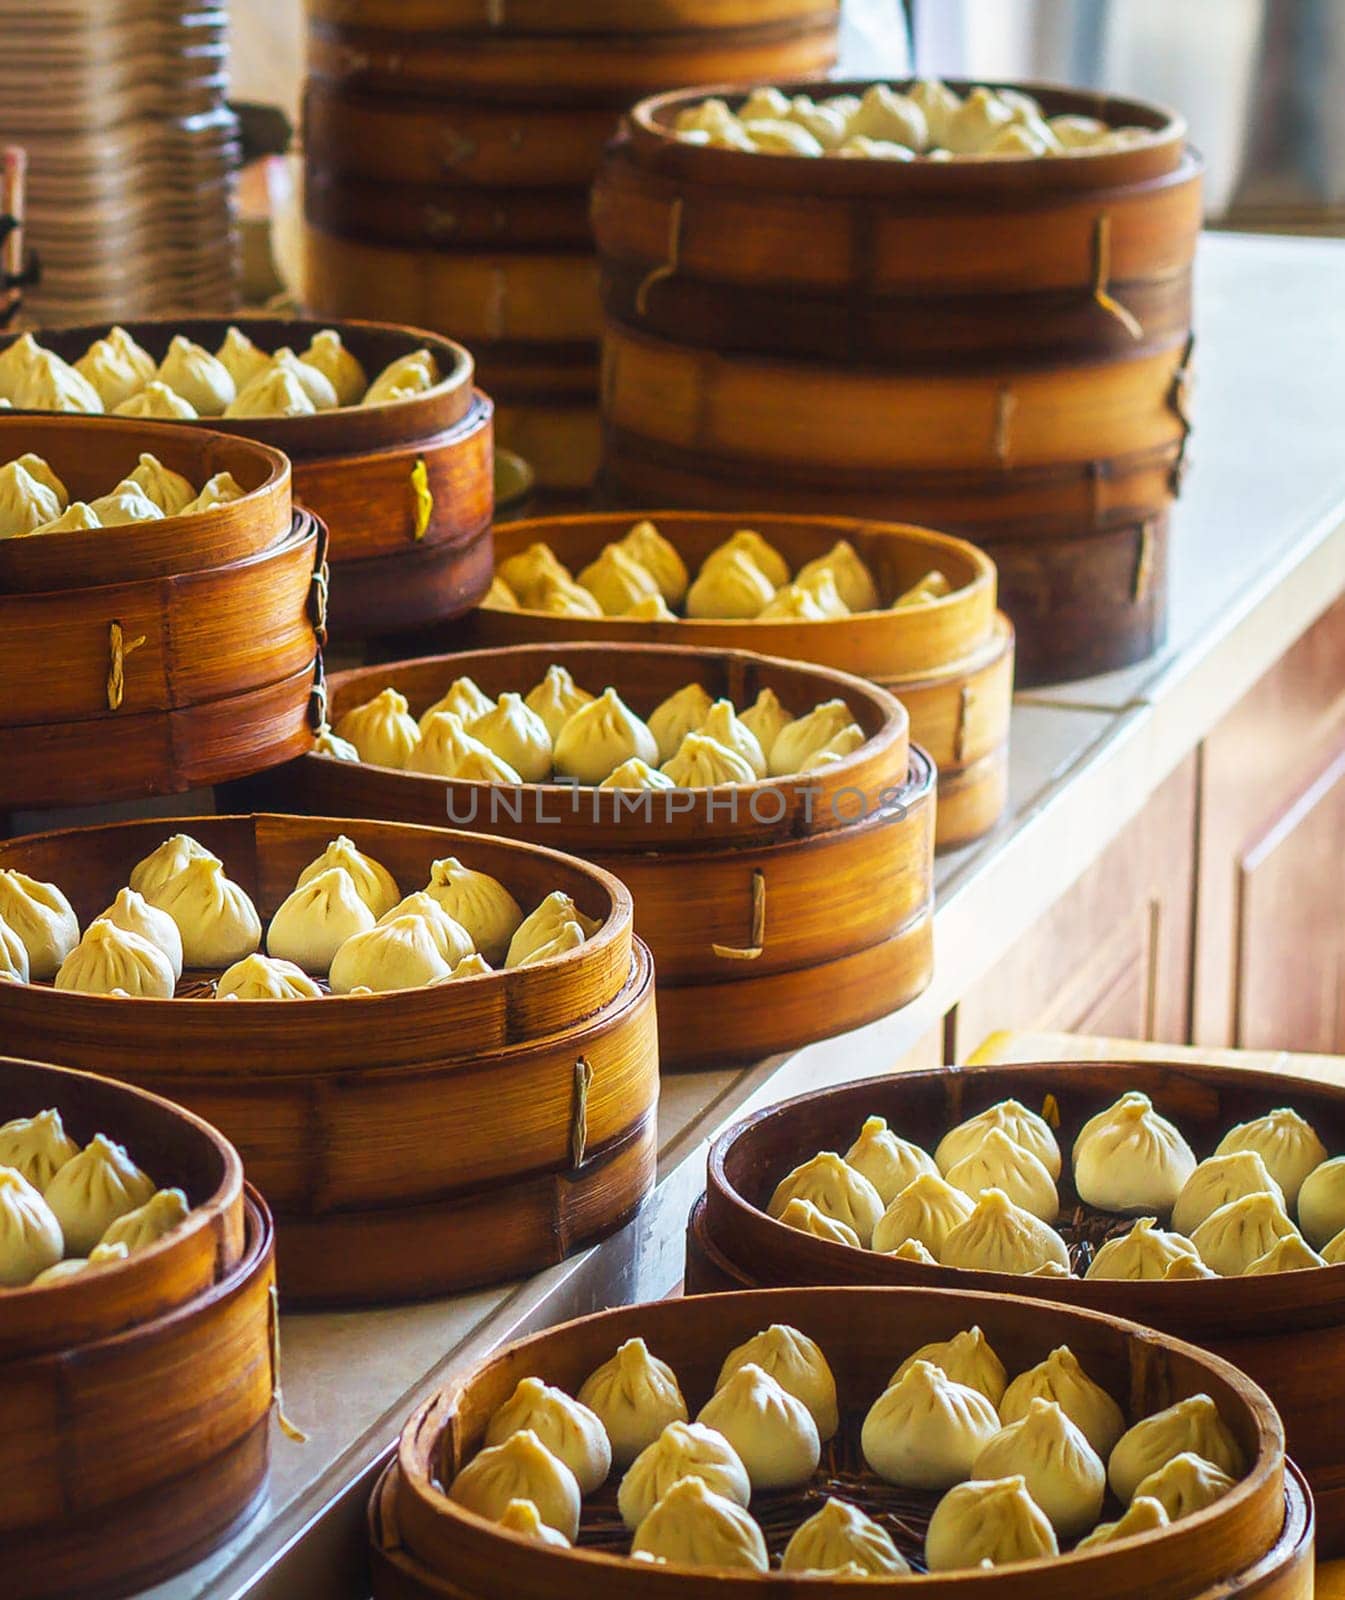 Magical China Food Pictures by TravelSync27